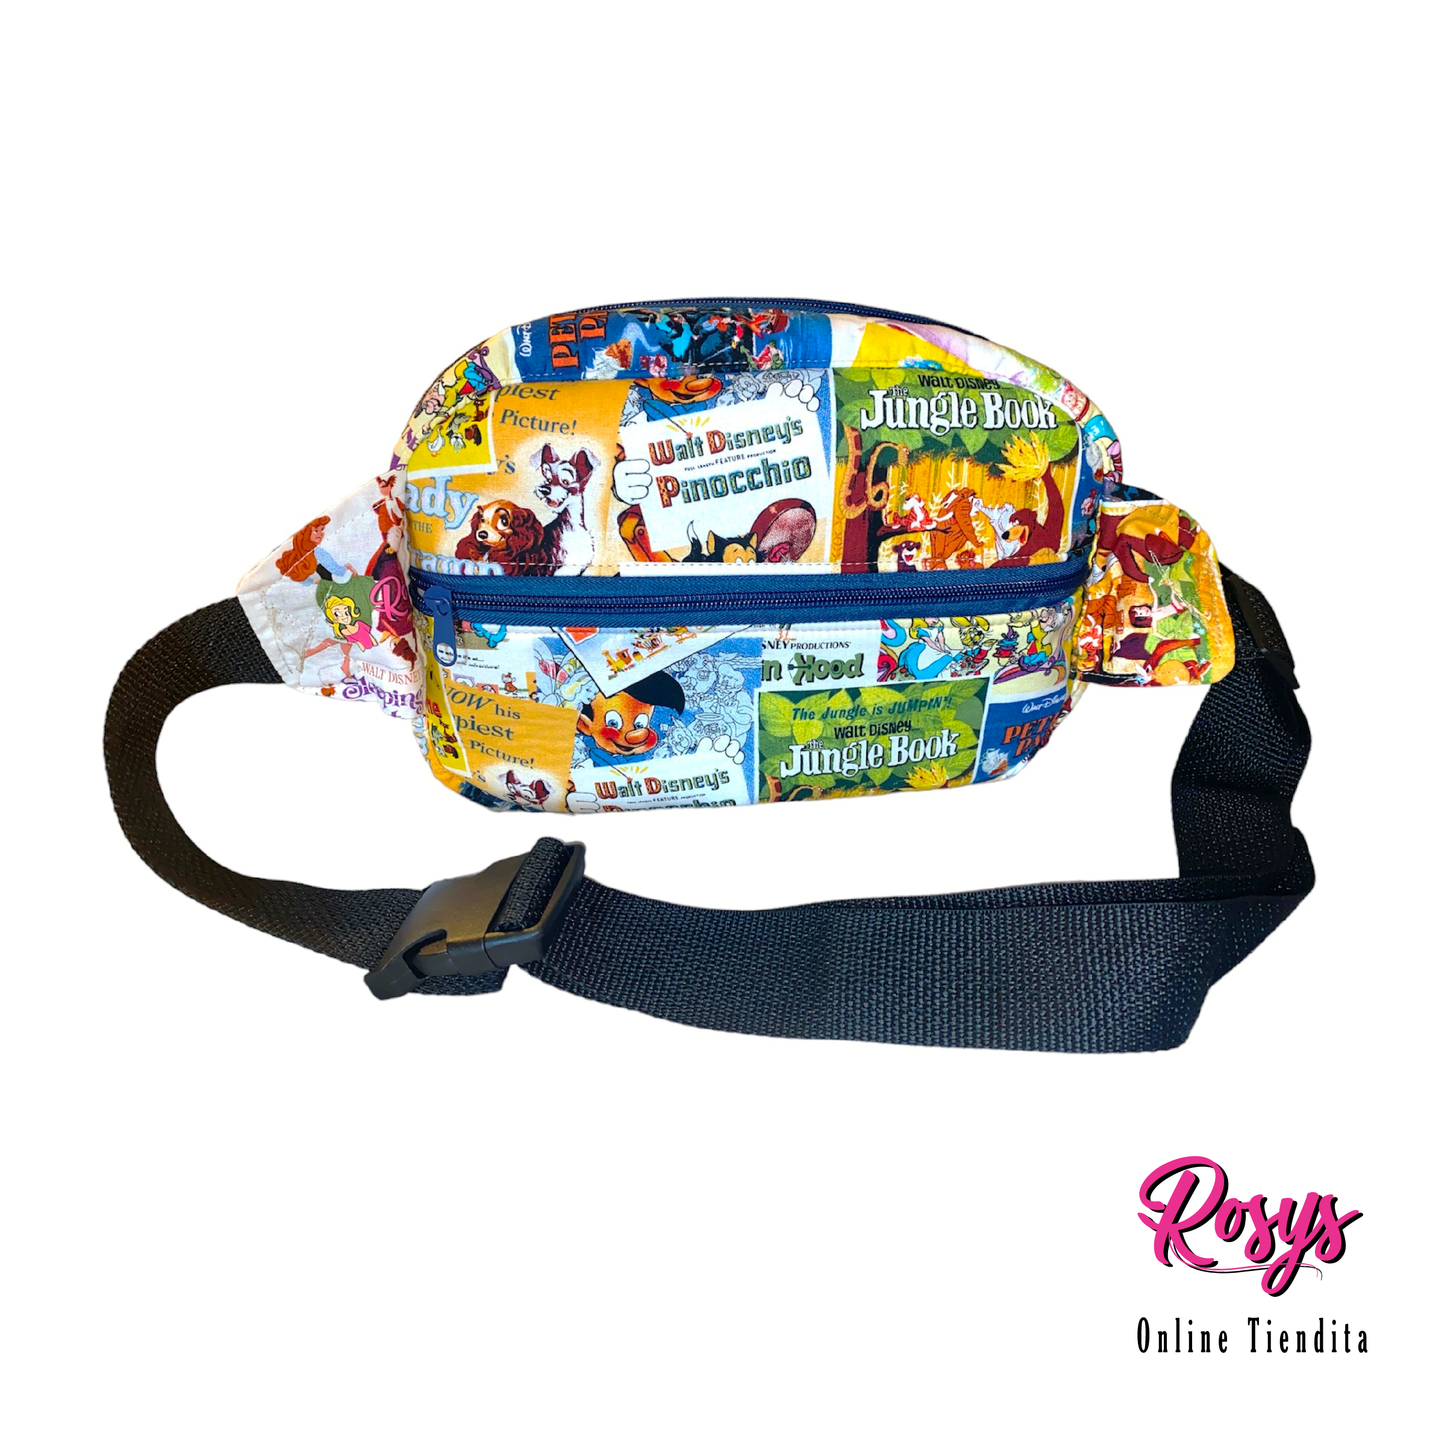 Read A Book Belt Bag | Made By Rosy!